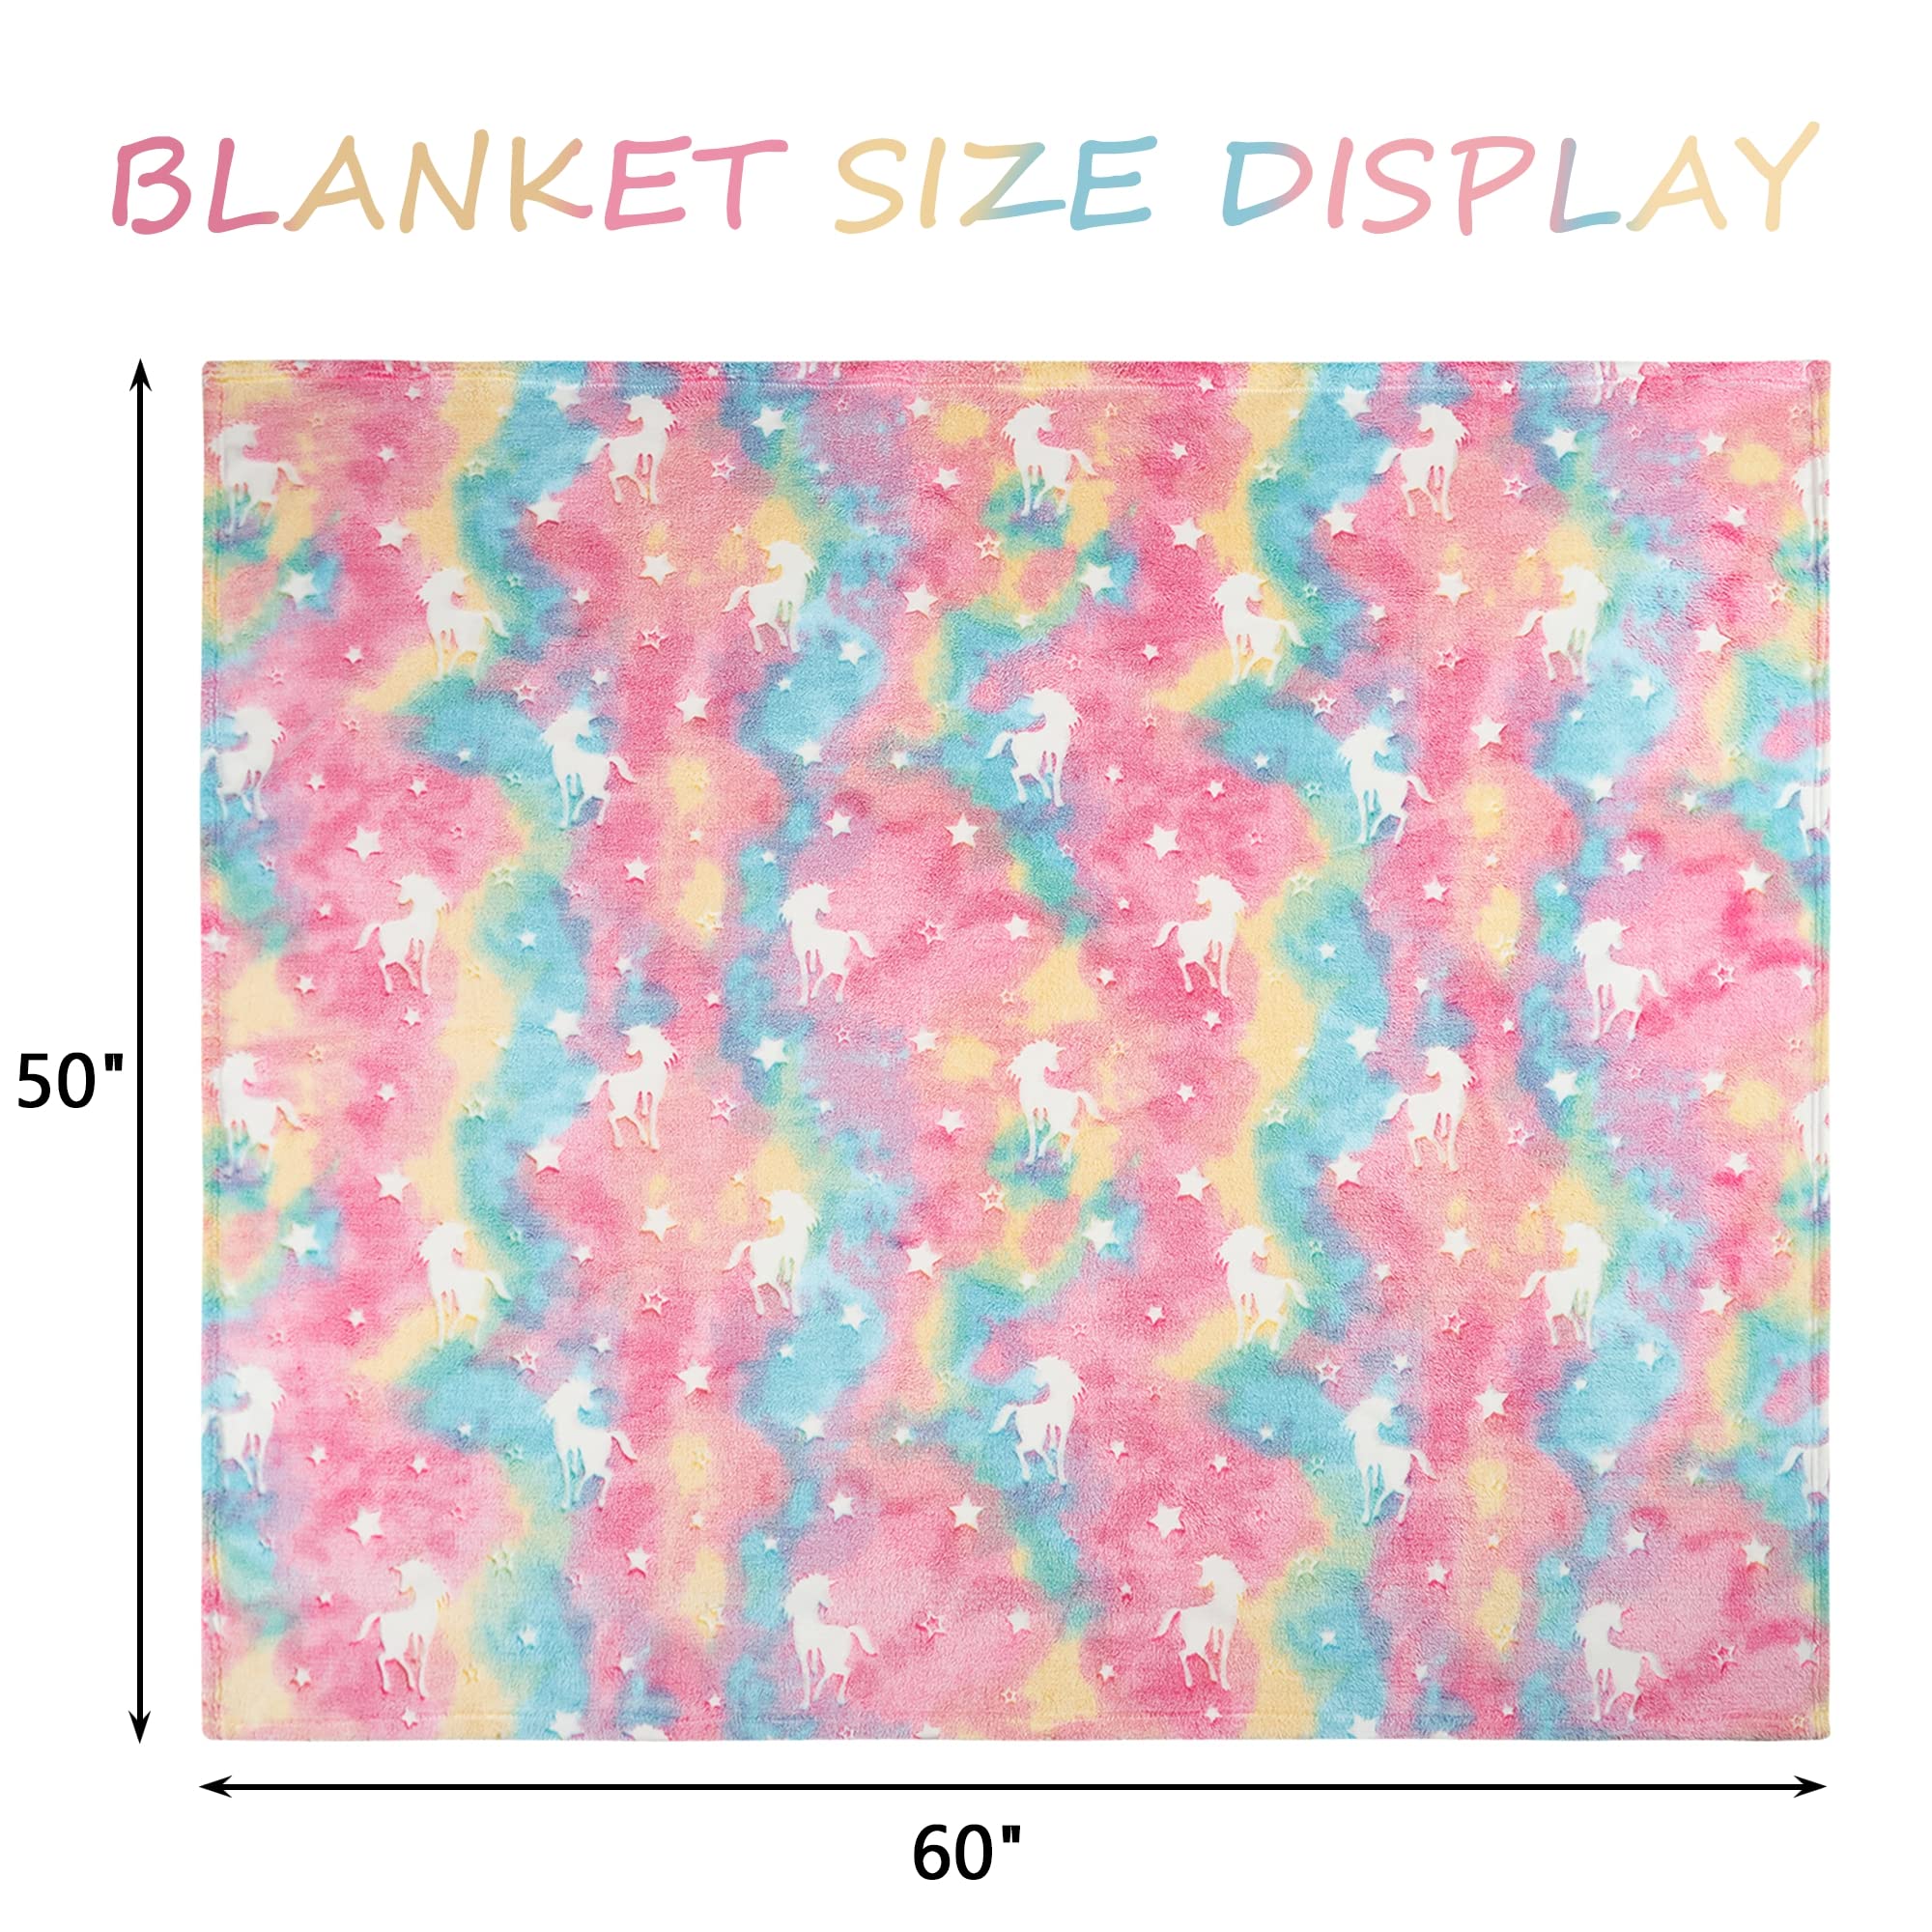 Glow in The Dark Throw Blanket, Luminous Unicorns Blanket for Boys Girls, Super Soft Fuzzy Plush Flannel Furry Fleece Blanket, Perfect for Bed or Sofa, Personalized Kids Gifts (Rainbow, 50" x 60")